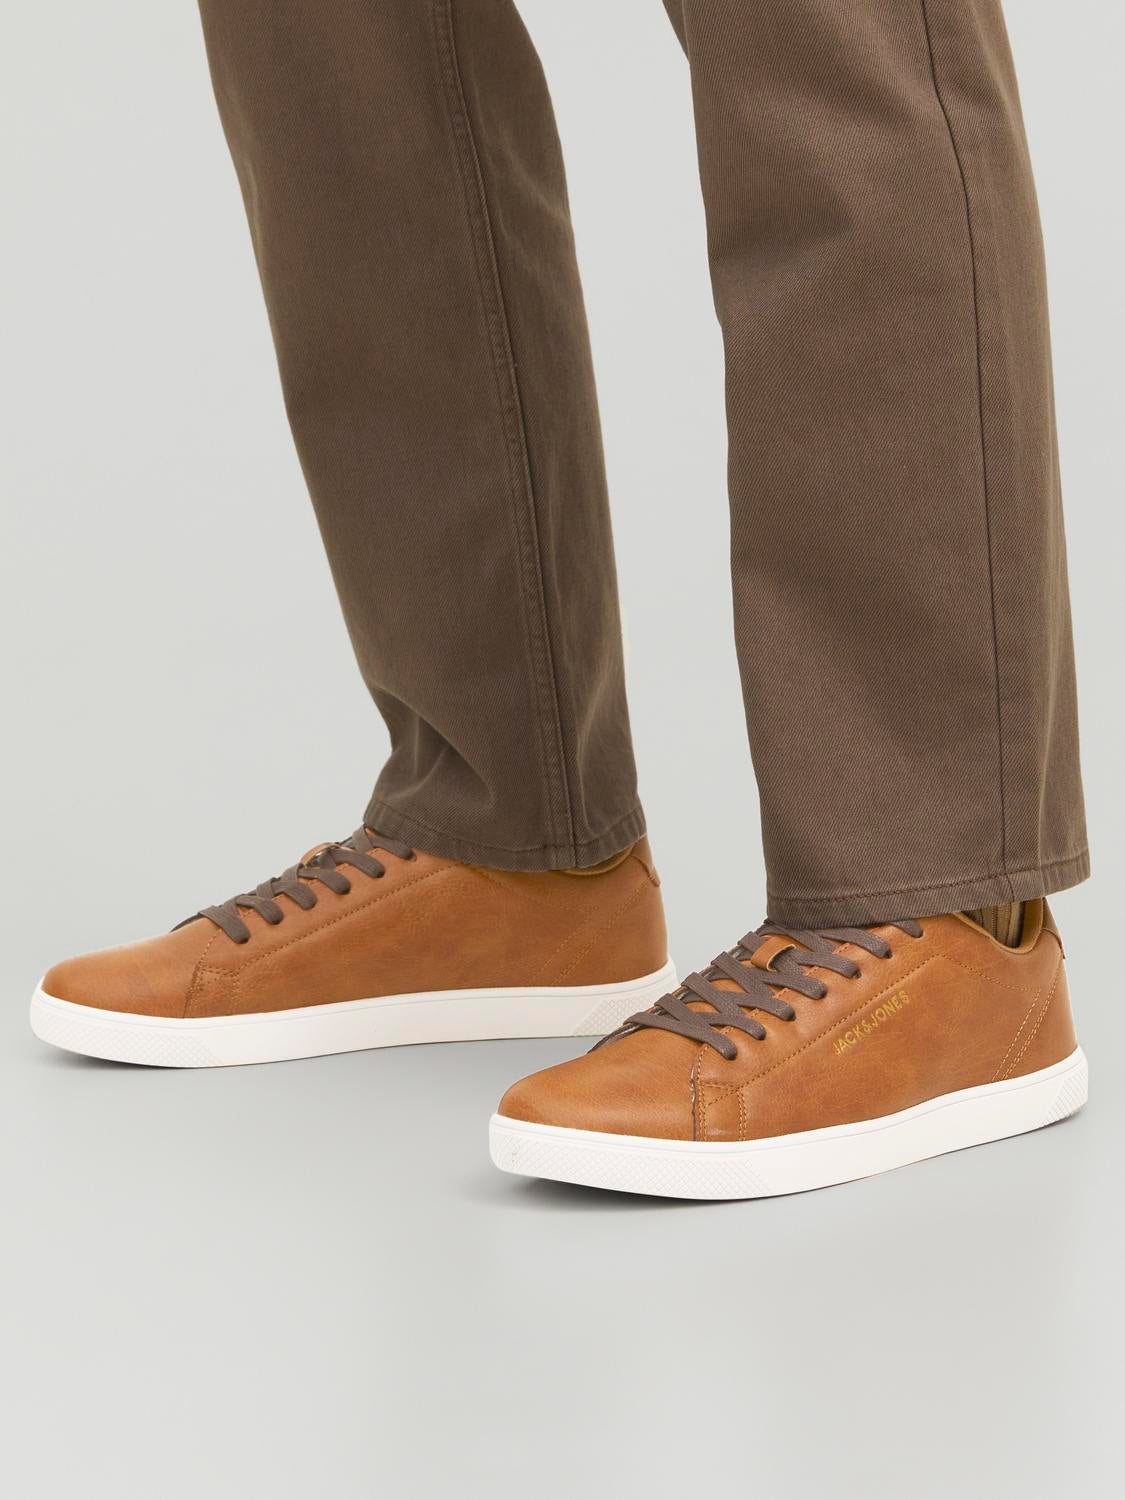 Buy RazMaz Super Stylish Leather Shoes for Men | Global Casual Shoes for Men  | Sneakers for Men | Lightweight and Stylish | Ideal for Office, Party or  other Events | Works